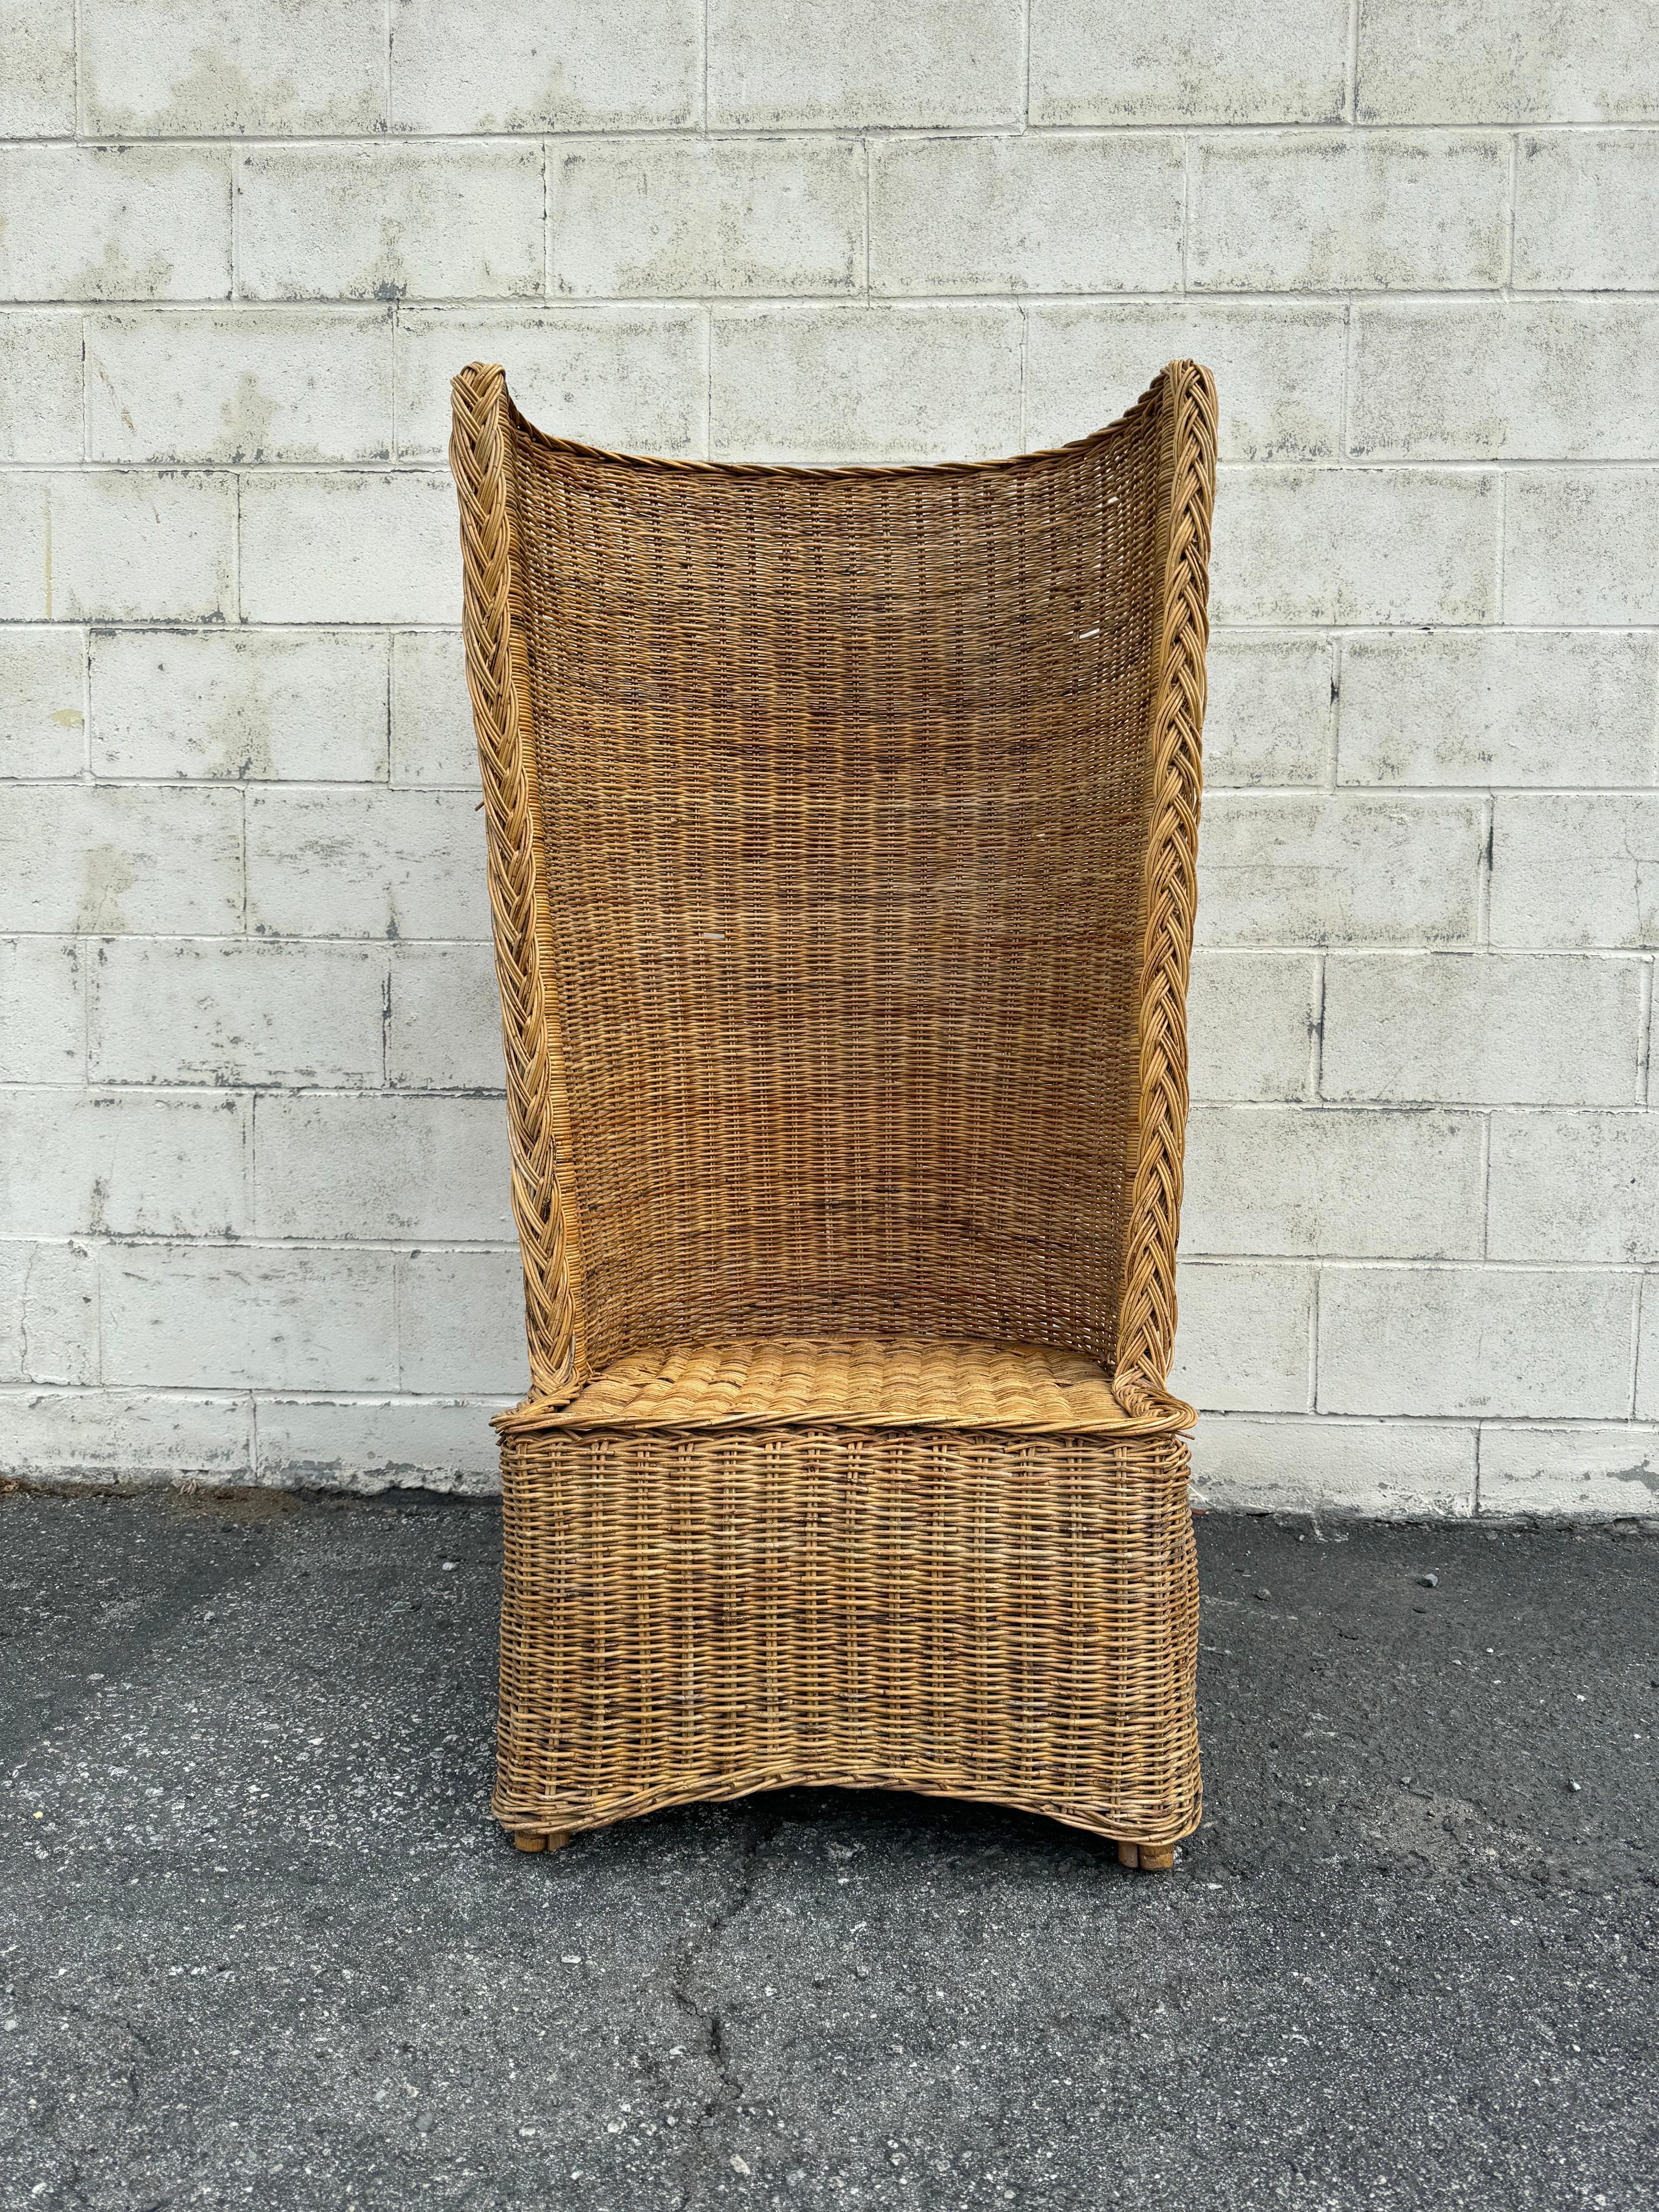 Very cool and boho chic rattan woven wicker chair. This one of a kind rattan chair comes with a unique high barrel back and comfortable seat. The chair sits on a bamboo frame for strength.

This chair is in excellent structural condition. It is